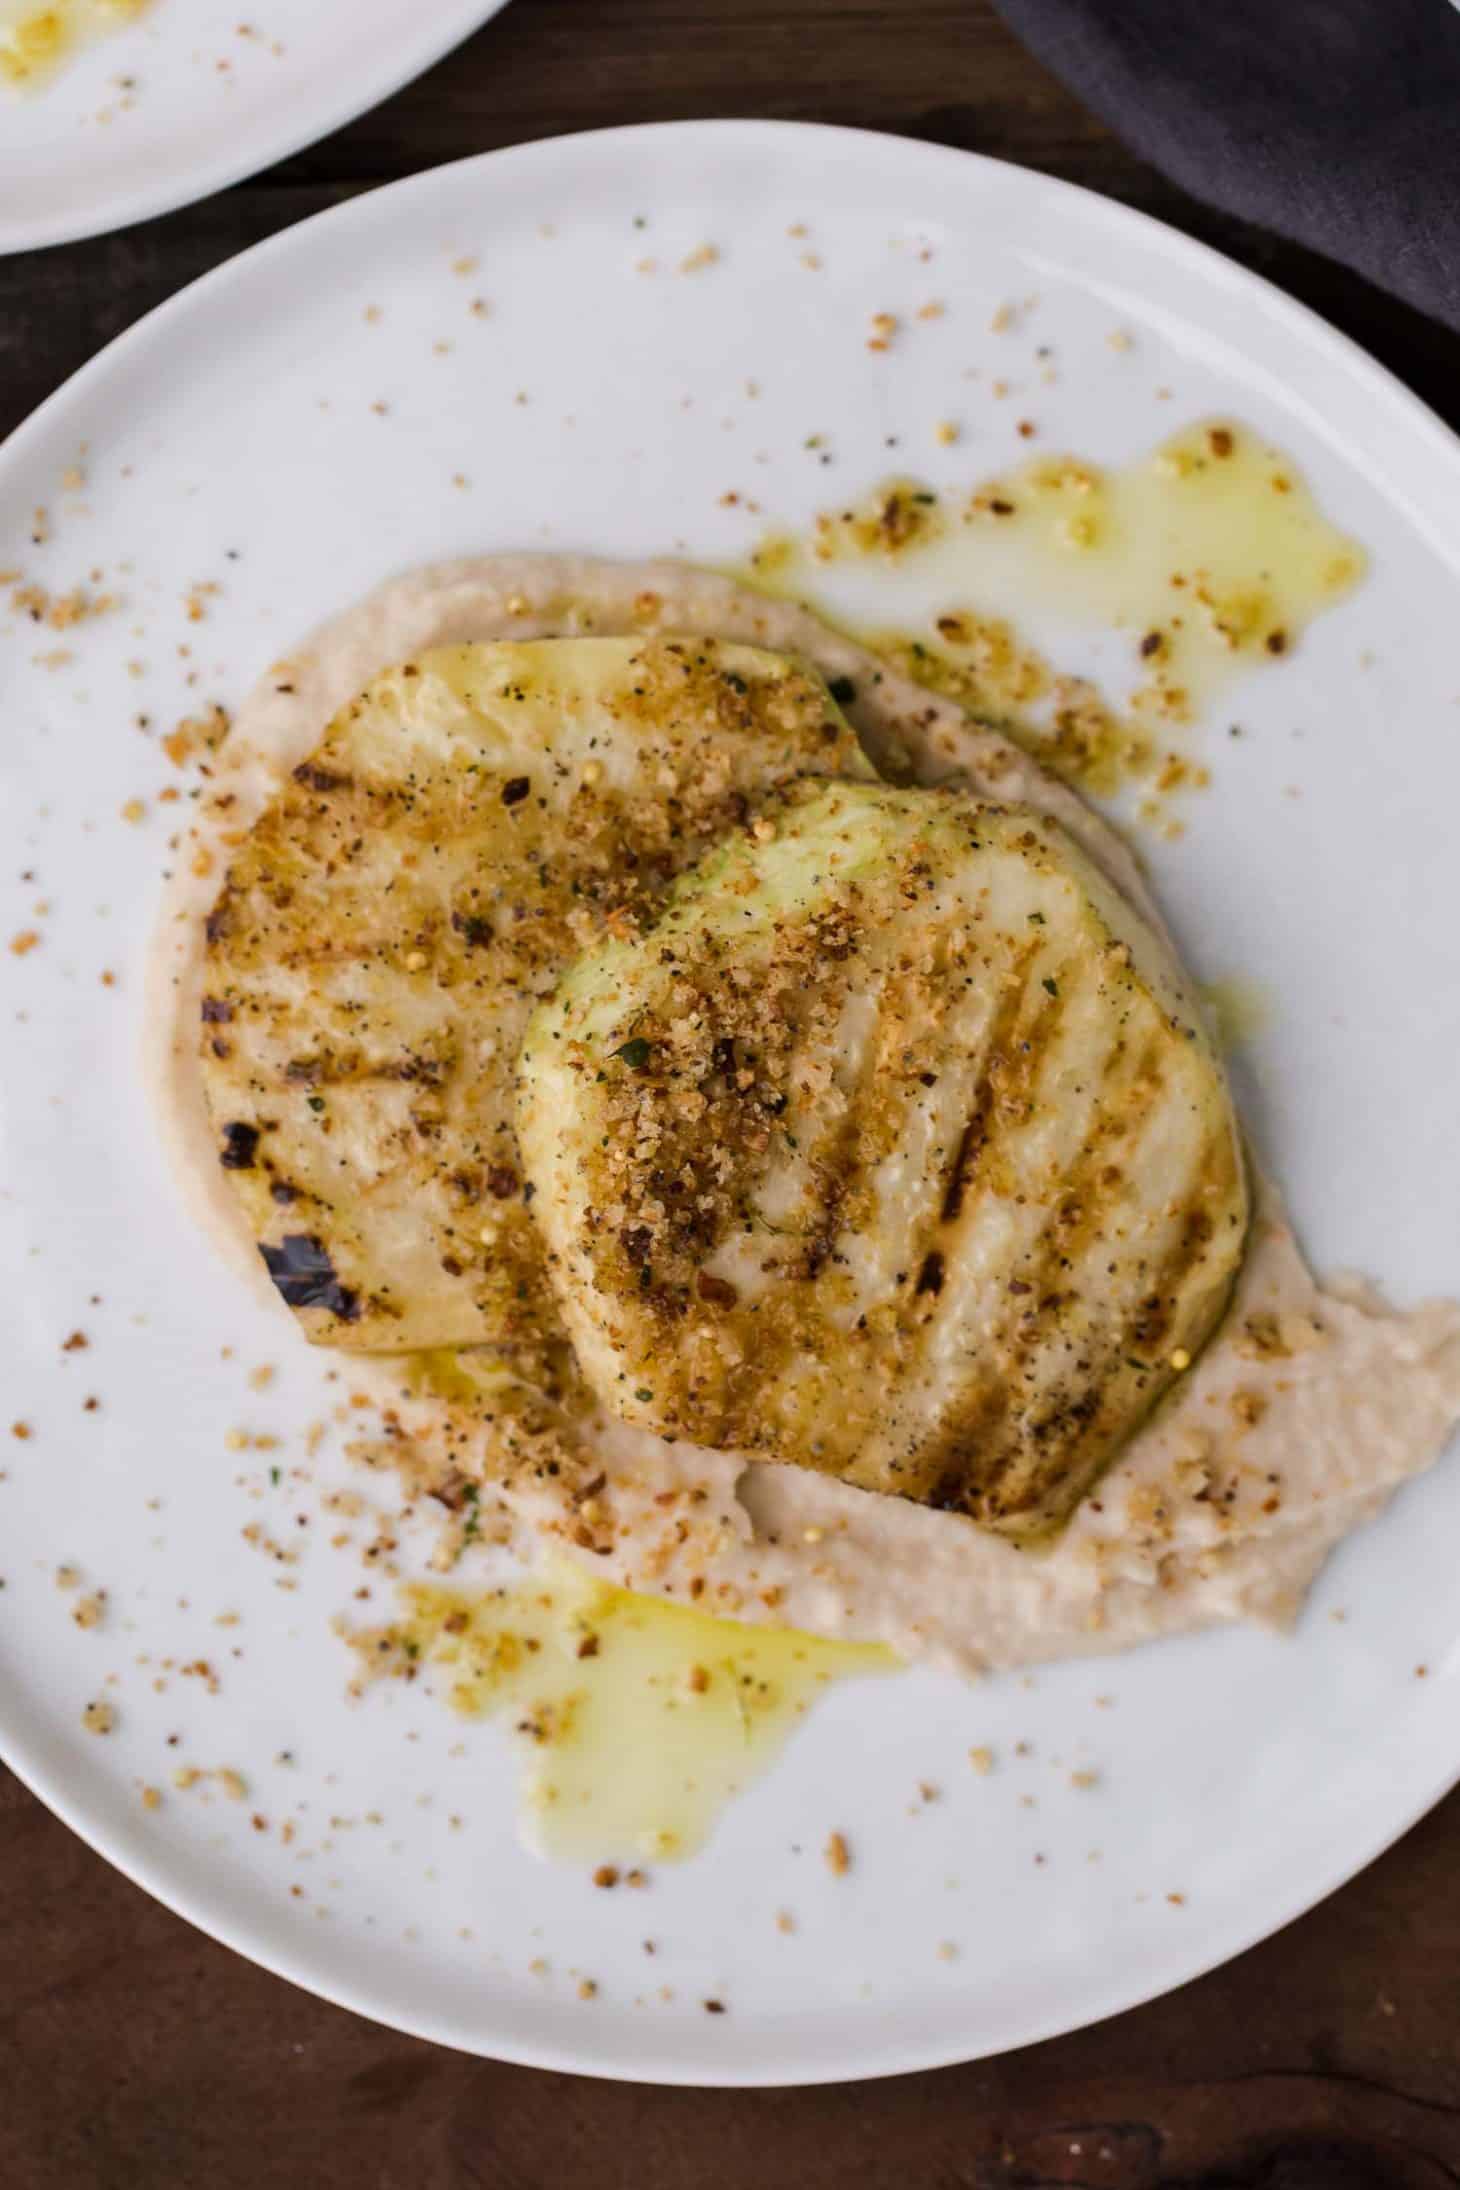 Grilled Celeriac with White Bean Puree and Breadcrumbs